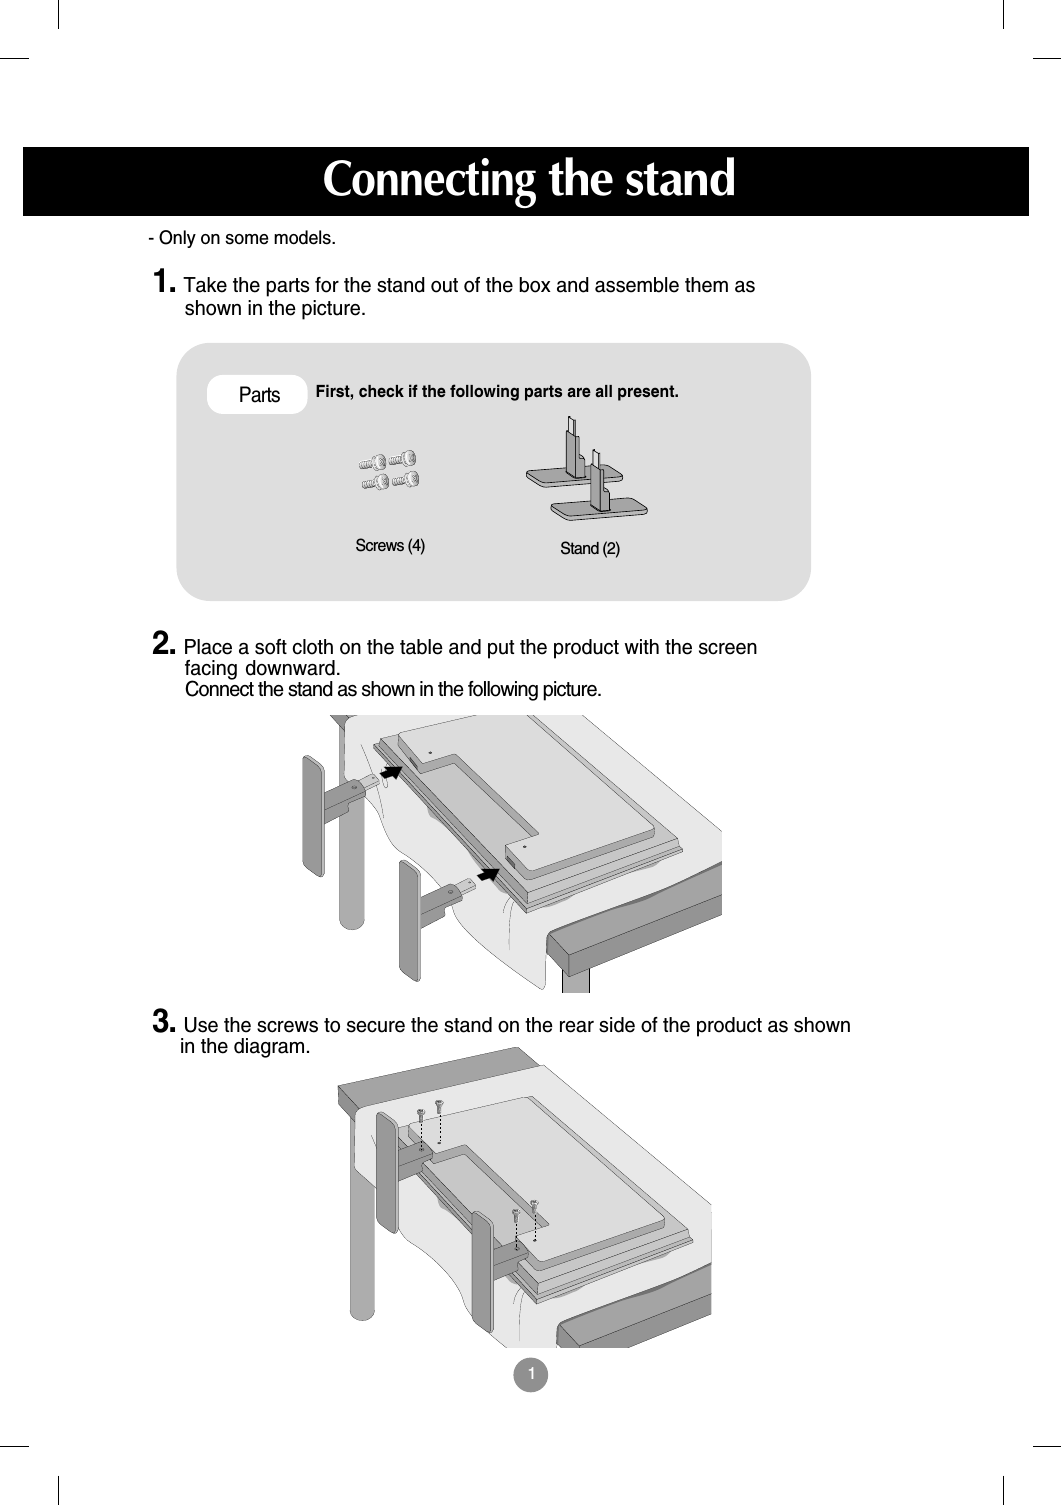 1First, check if the following parts are all present.Stand (2)Screws (4)Parts1. Take the parts for the stand out of the box and assemble them asshown in the picture.2. Place a soft cloth on the table and put the product with the screenfacing downward.  Connect the stand as shown in the following picture.- Only on some models.3. Use the screws to secure the stand on the rear side of the product as shownin the diagram.Connectingthe stand